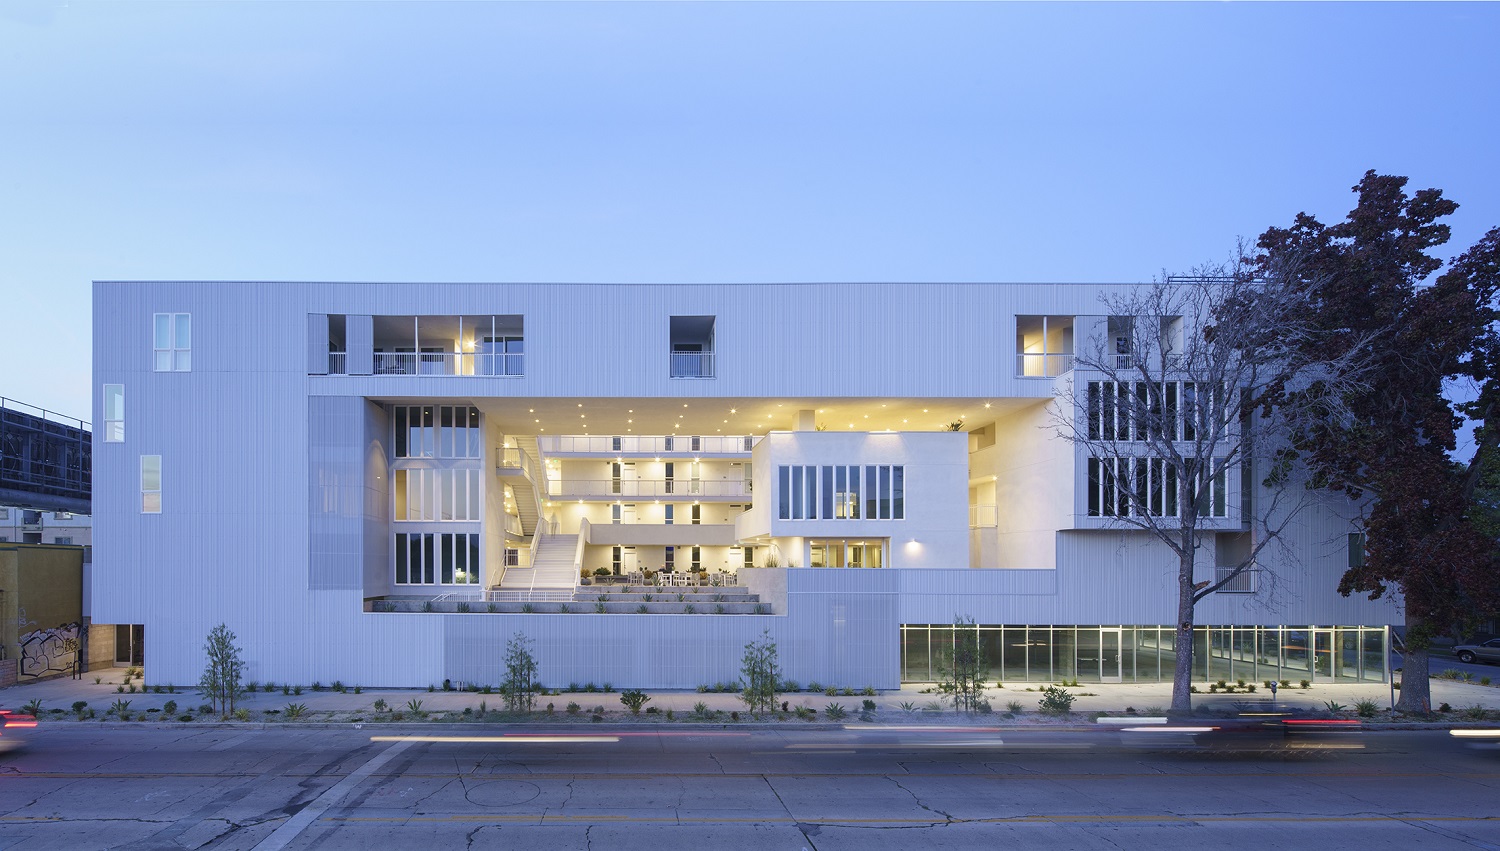 Photo of the white, front facade of 11 NOHO, an affordable housing complex in Los Angeles